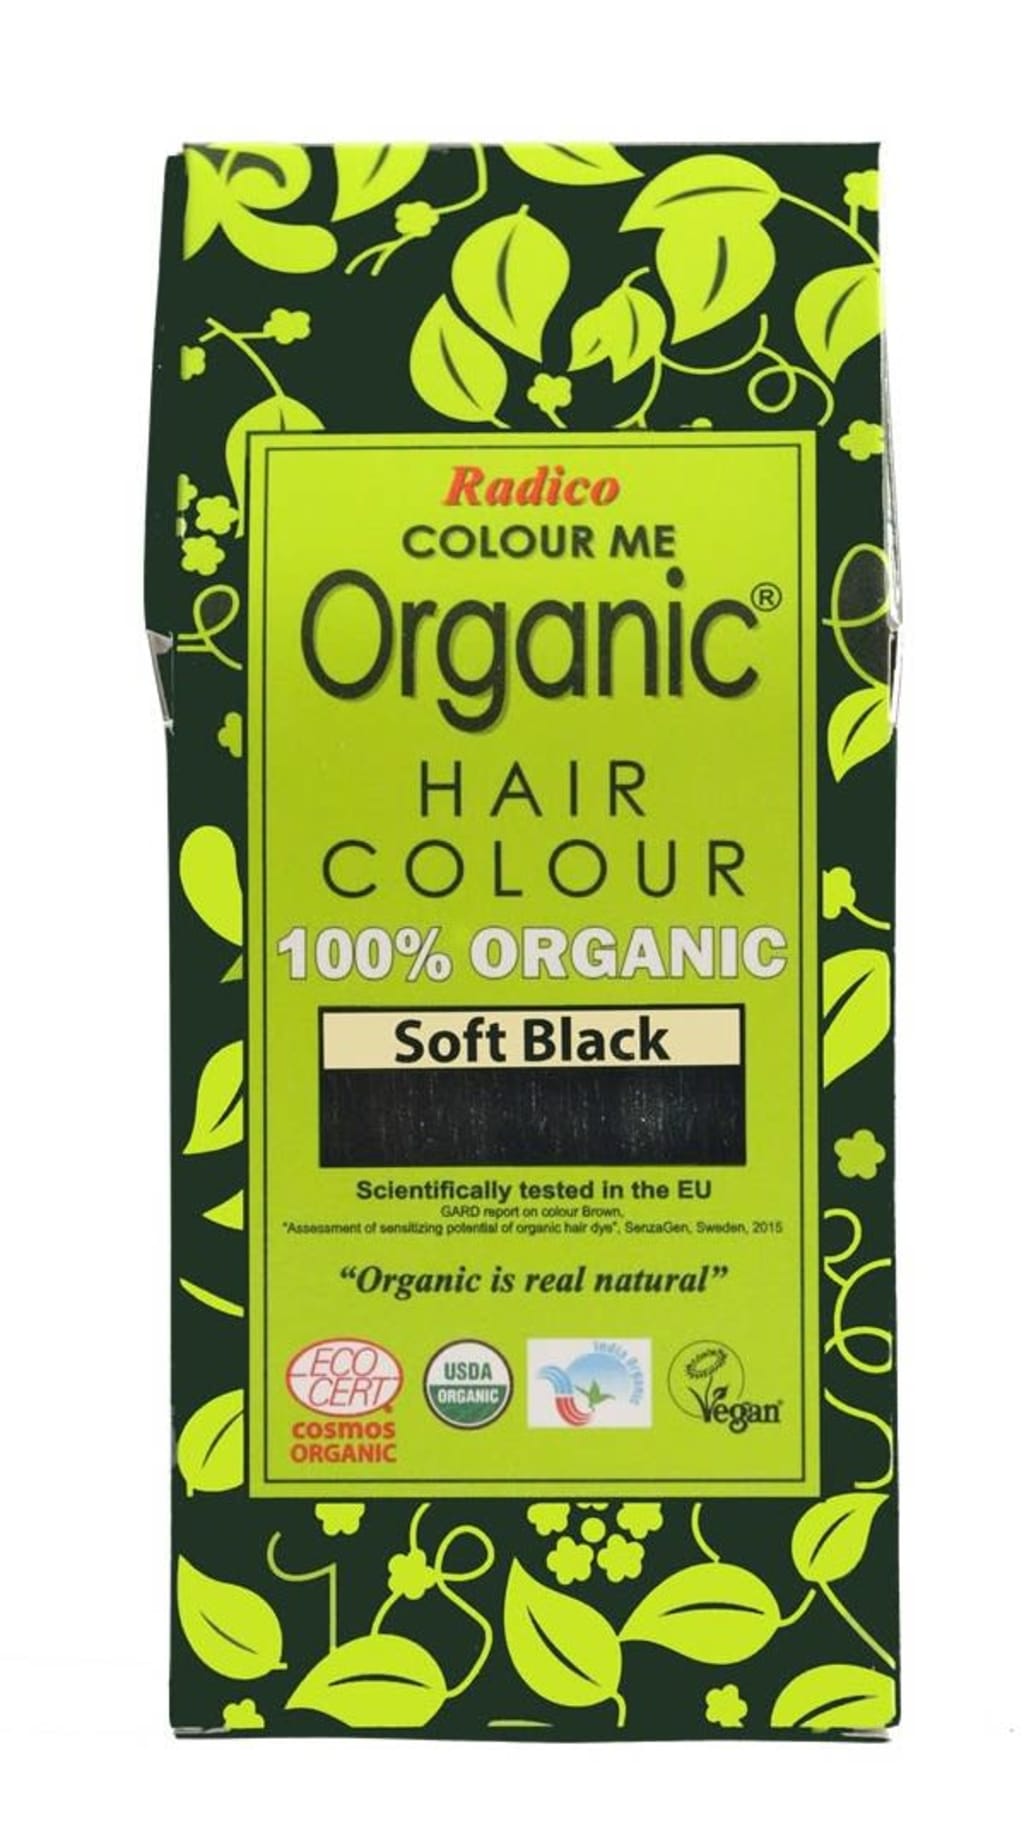 7 Best Organic Hair Dyes in Malaysia 2020 - Top Brands & Reviews